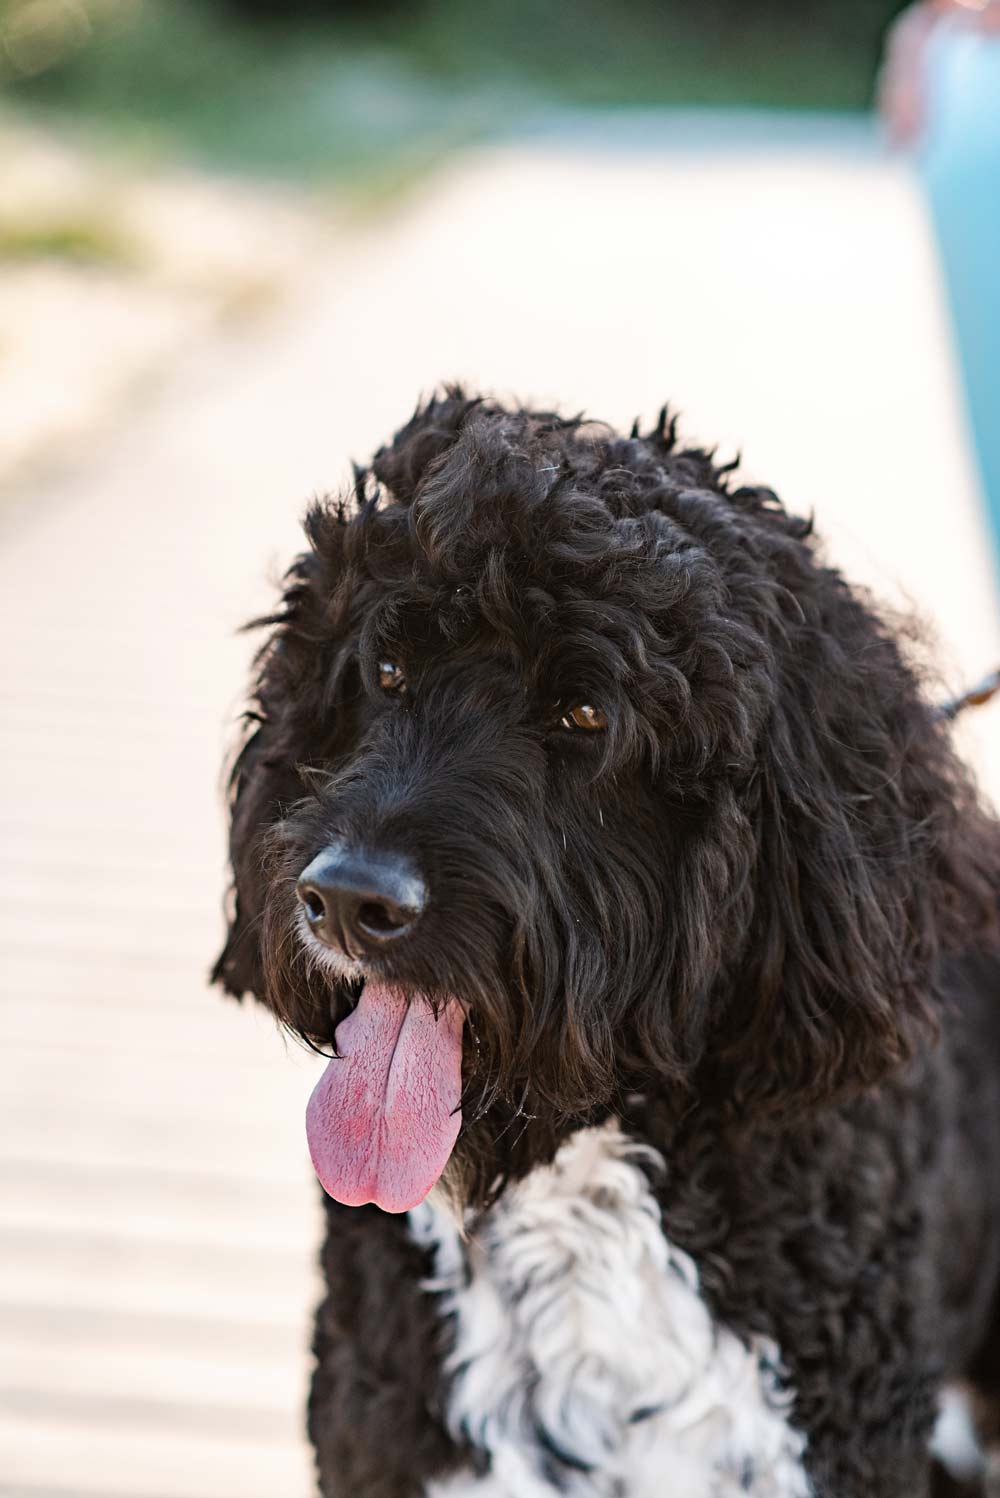 Kemba the labradoodle sits with his tongue hanging out